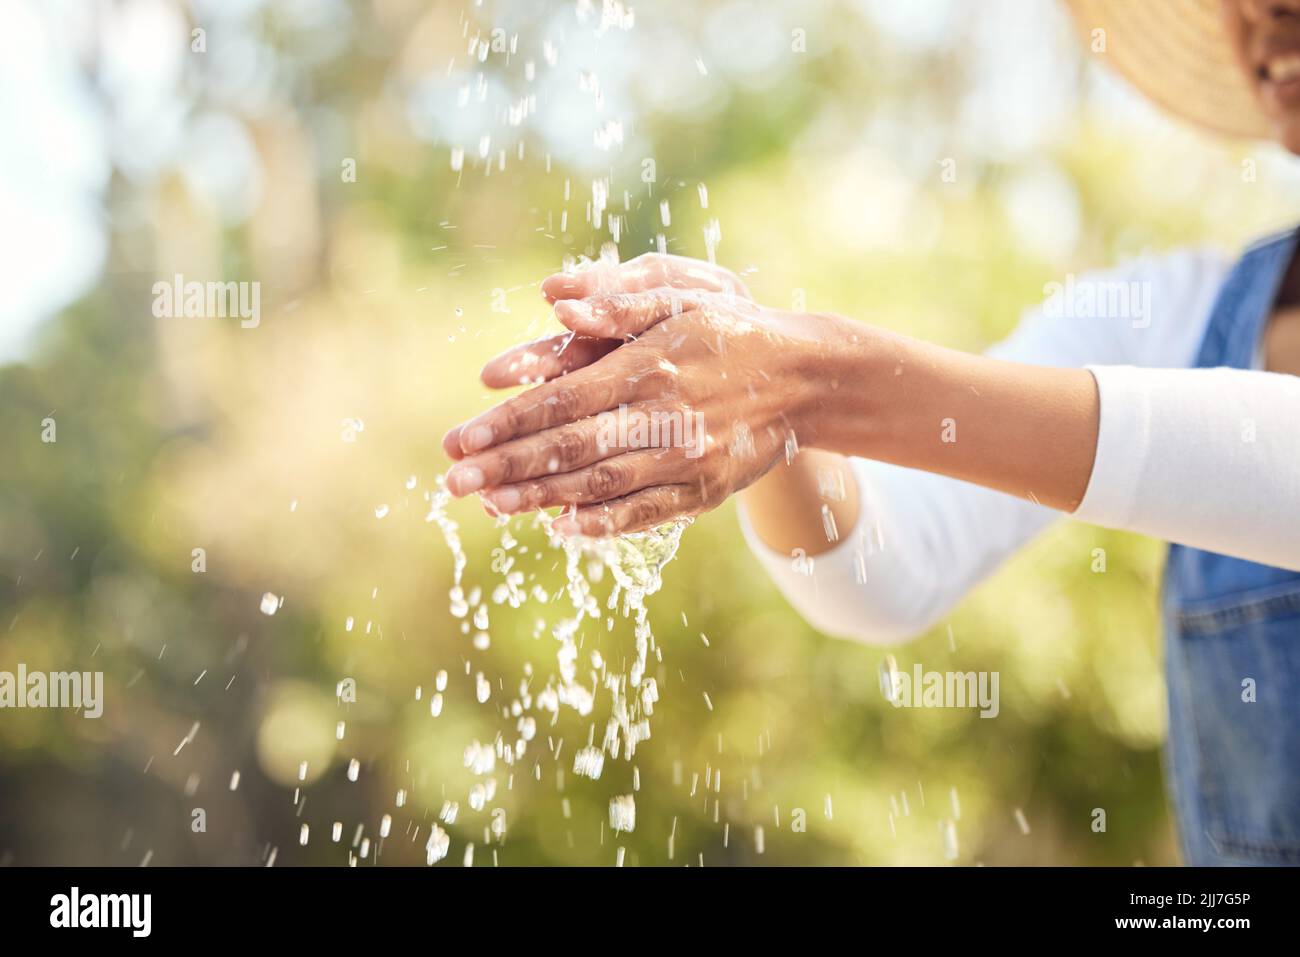 Keep it clean and stay healthy. an unrecognizable woman washing her hands outside. Stock Photo